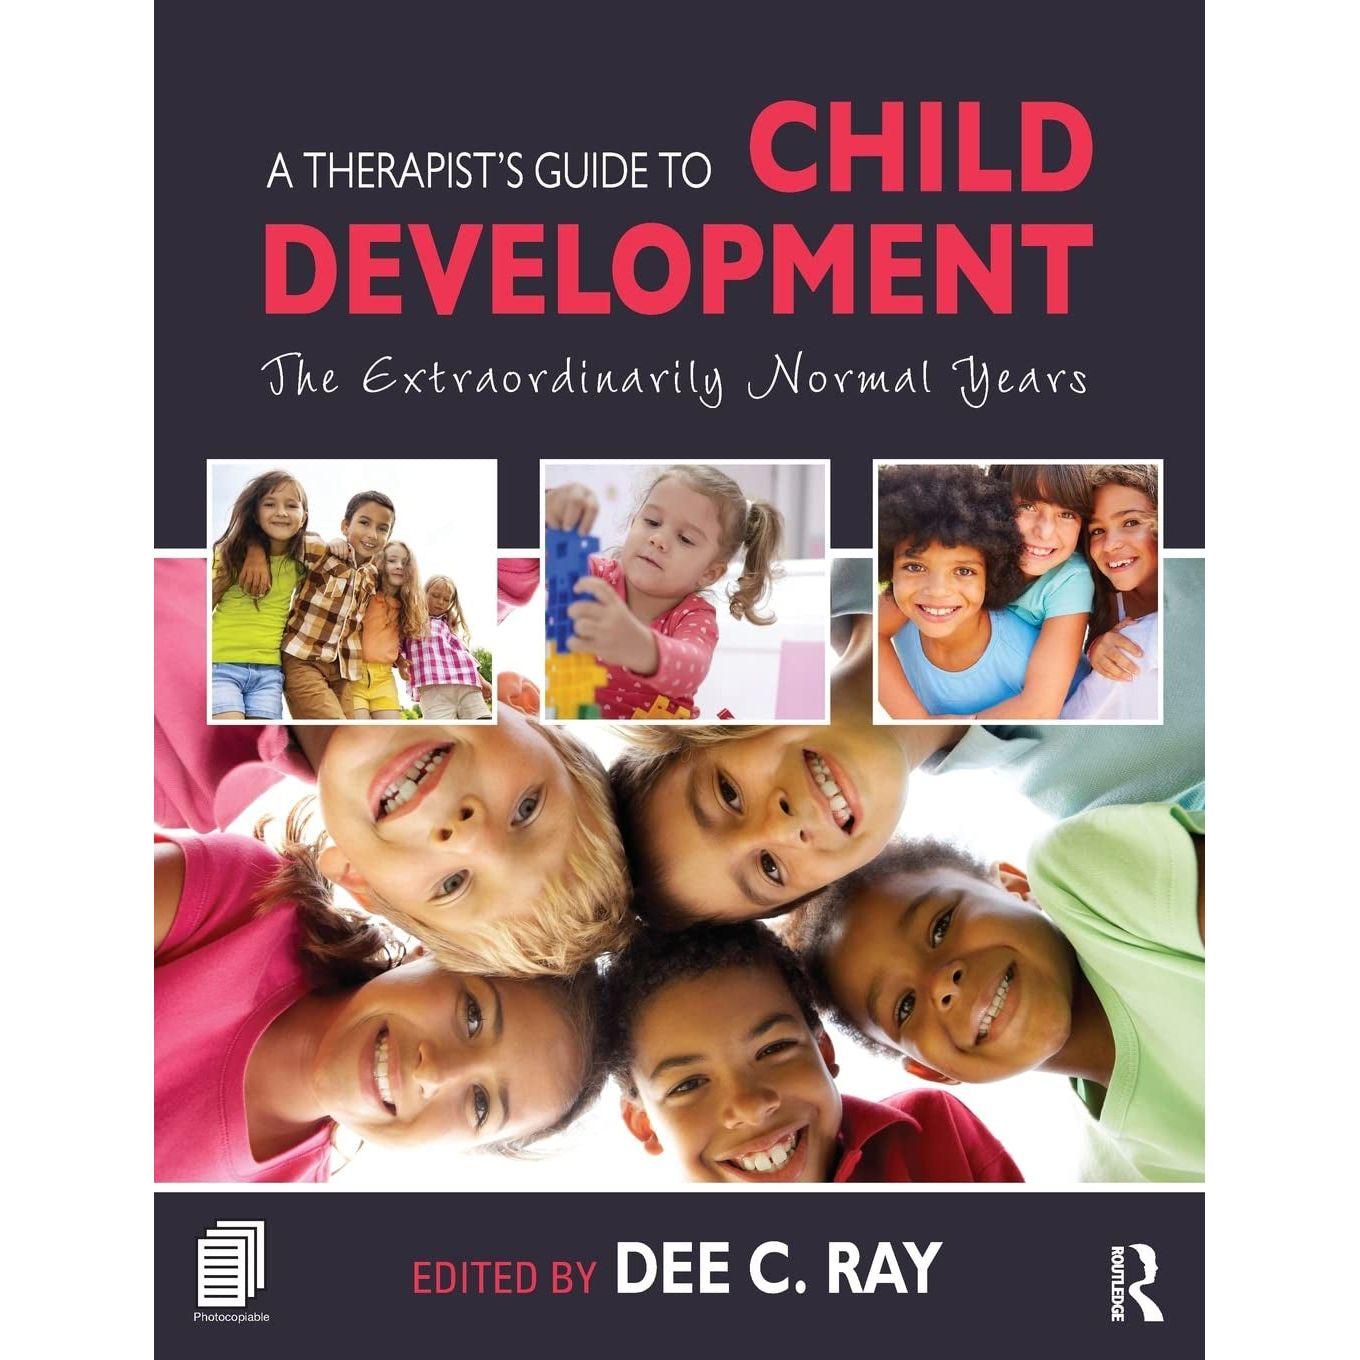 A Therapist's Guide to Child Development: the Extraordinarily Normal Years